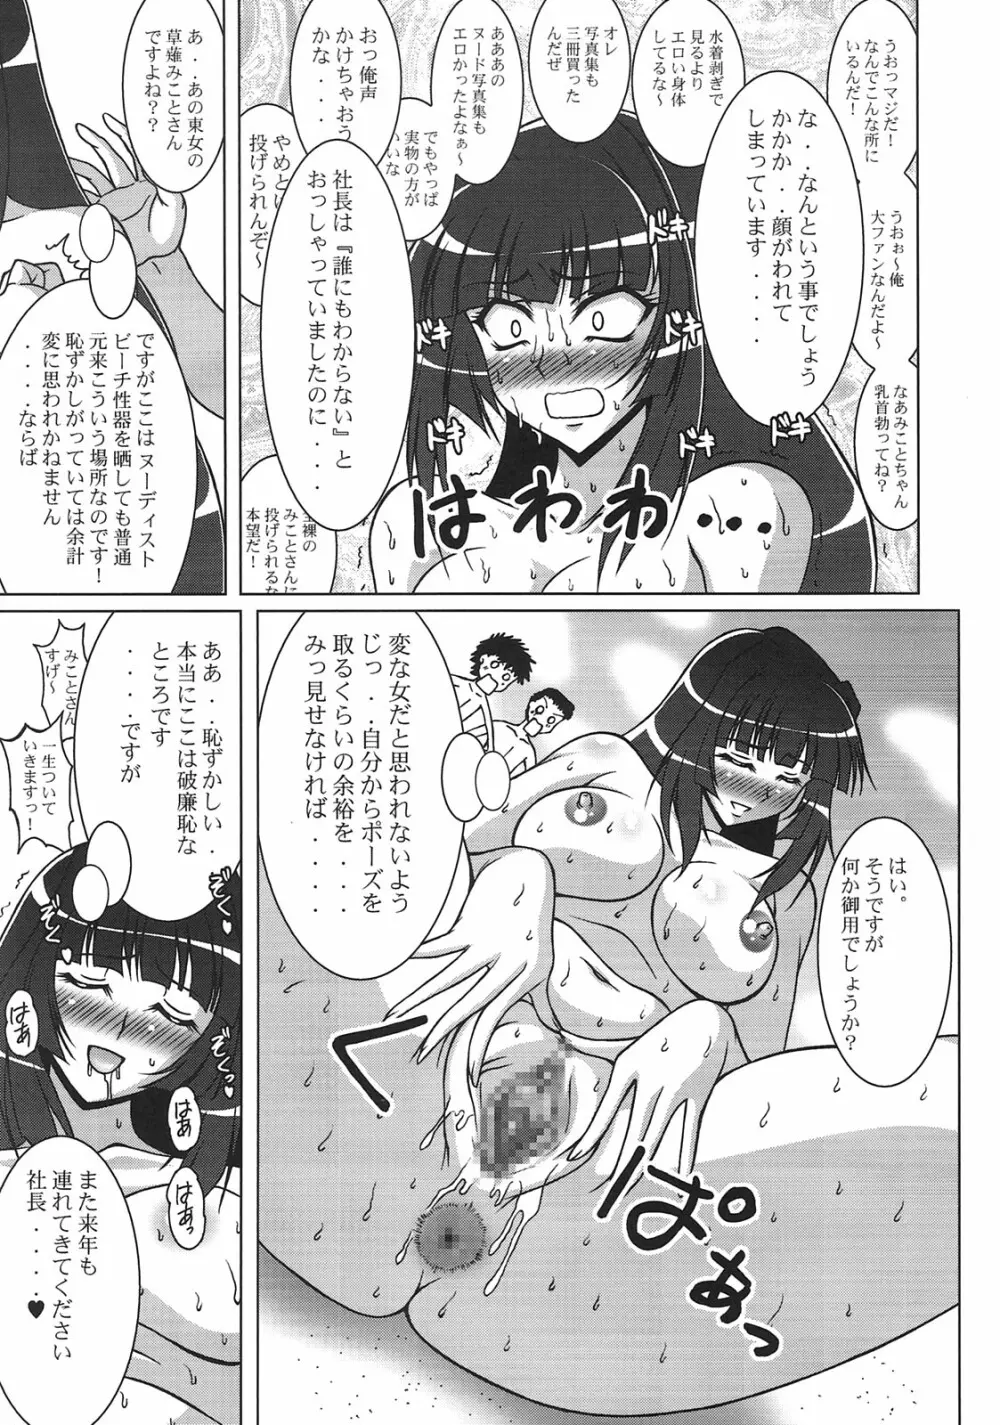 THE WRESTLE M@STER Page.32